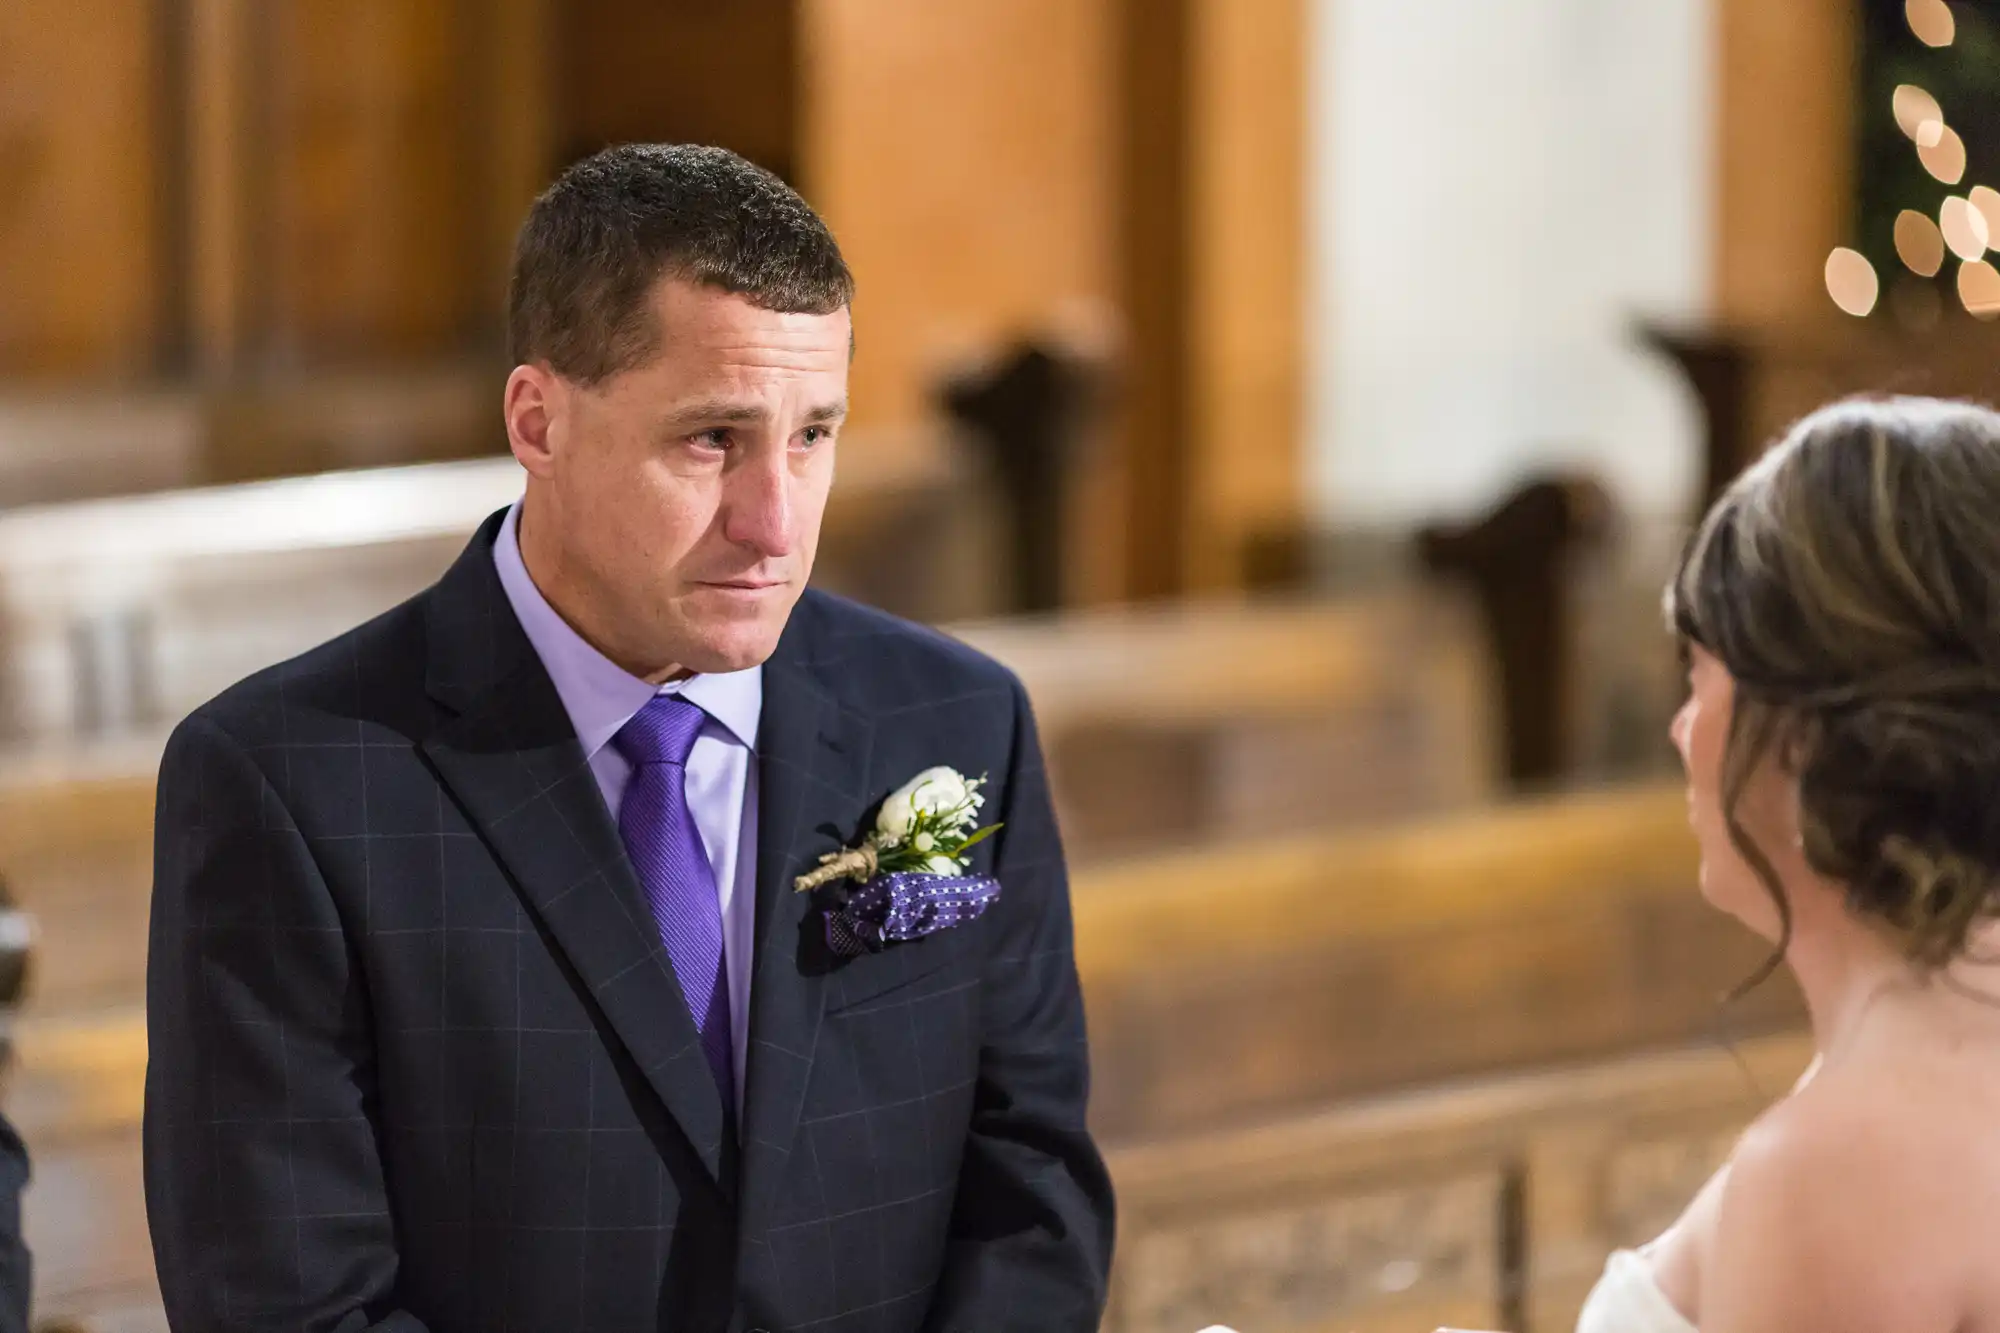 A man in a suit with a boutonniere looks emotionally at a woman in a bridal gown inside a church.